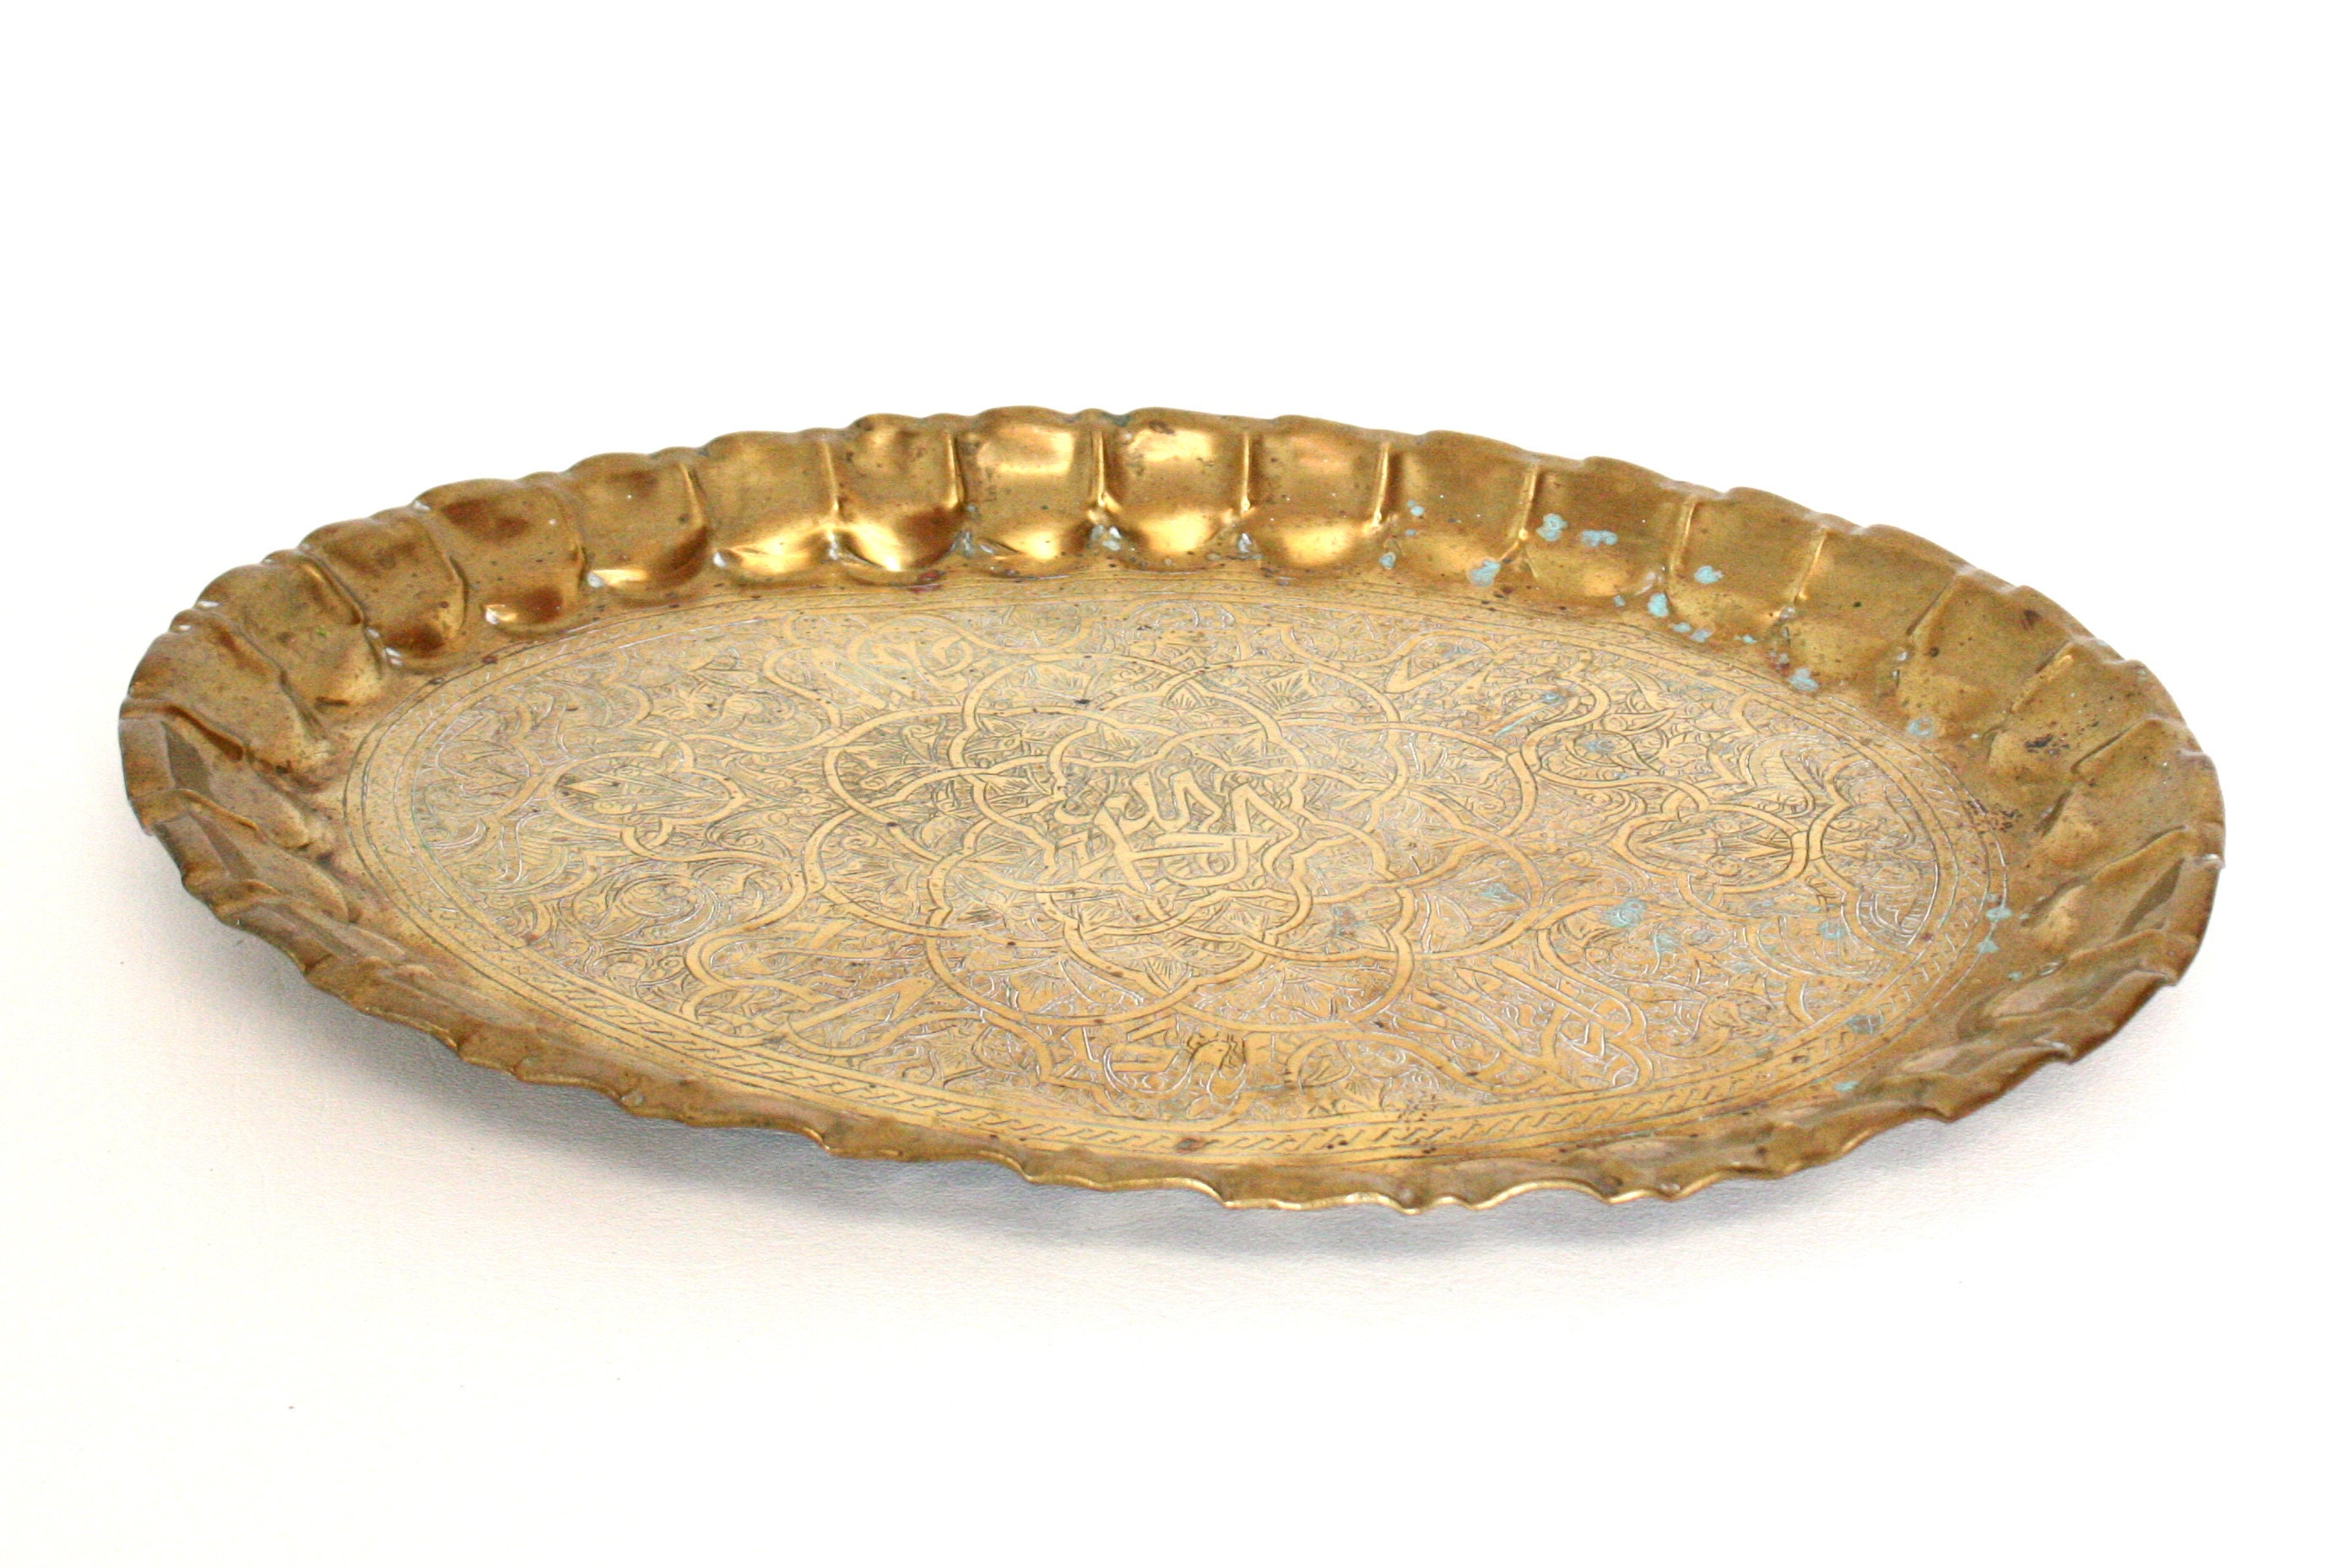 Vintage Oval Shaped Brass Tray With Ornate Etched Design & Aged